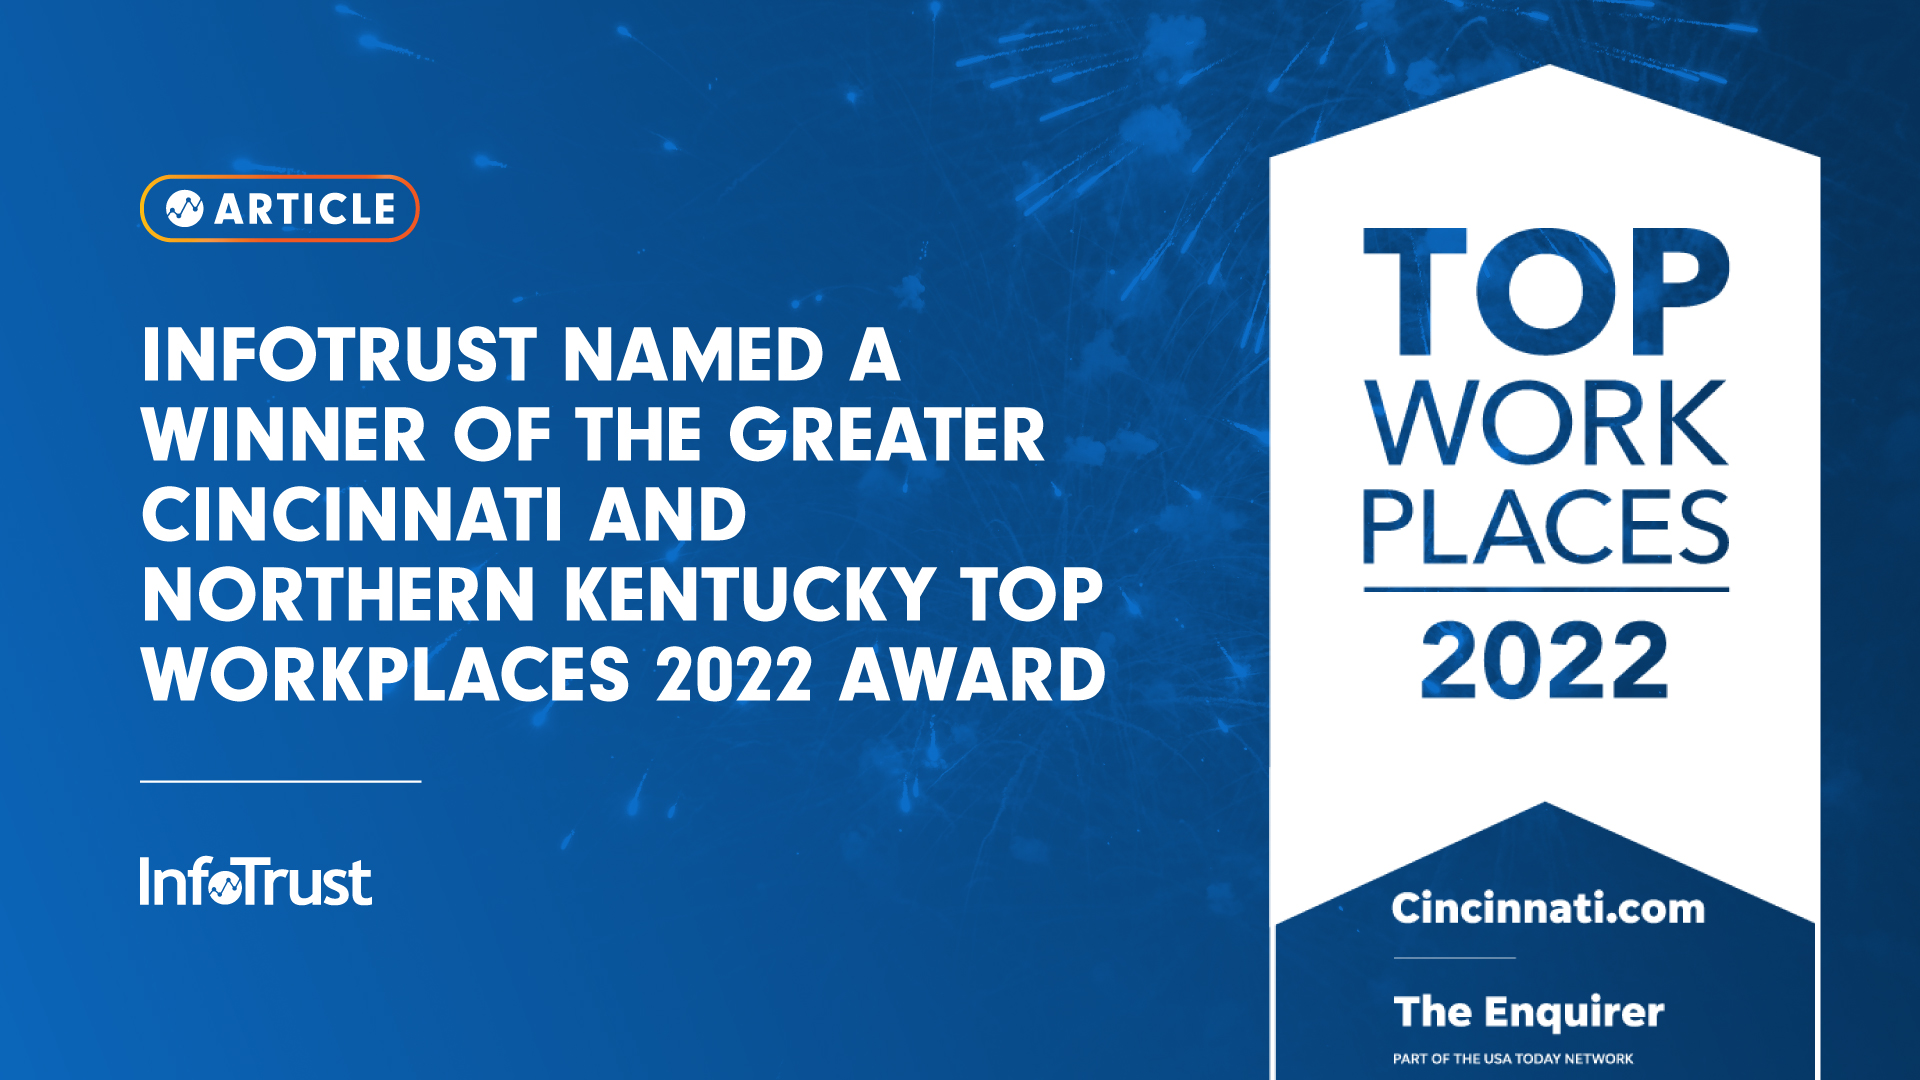 InfoTrust Named a Winner of the Greater Cincinnati and Northern Kentucky Top Workplaces 2022 Award